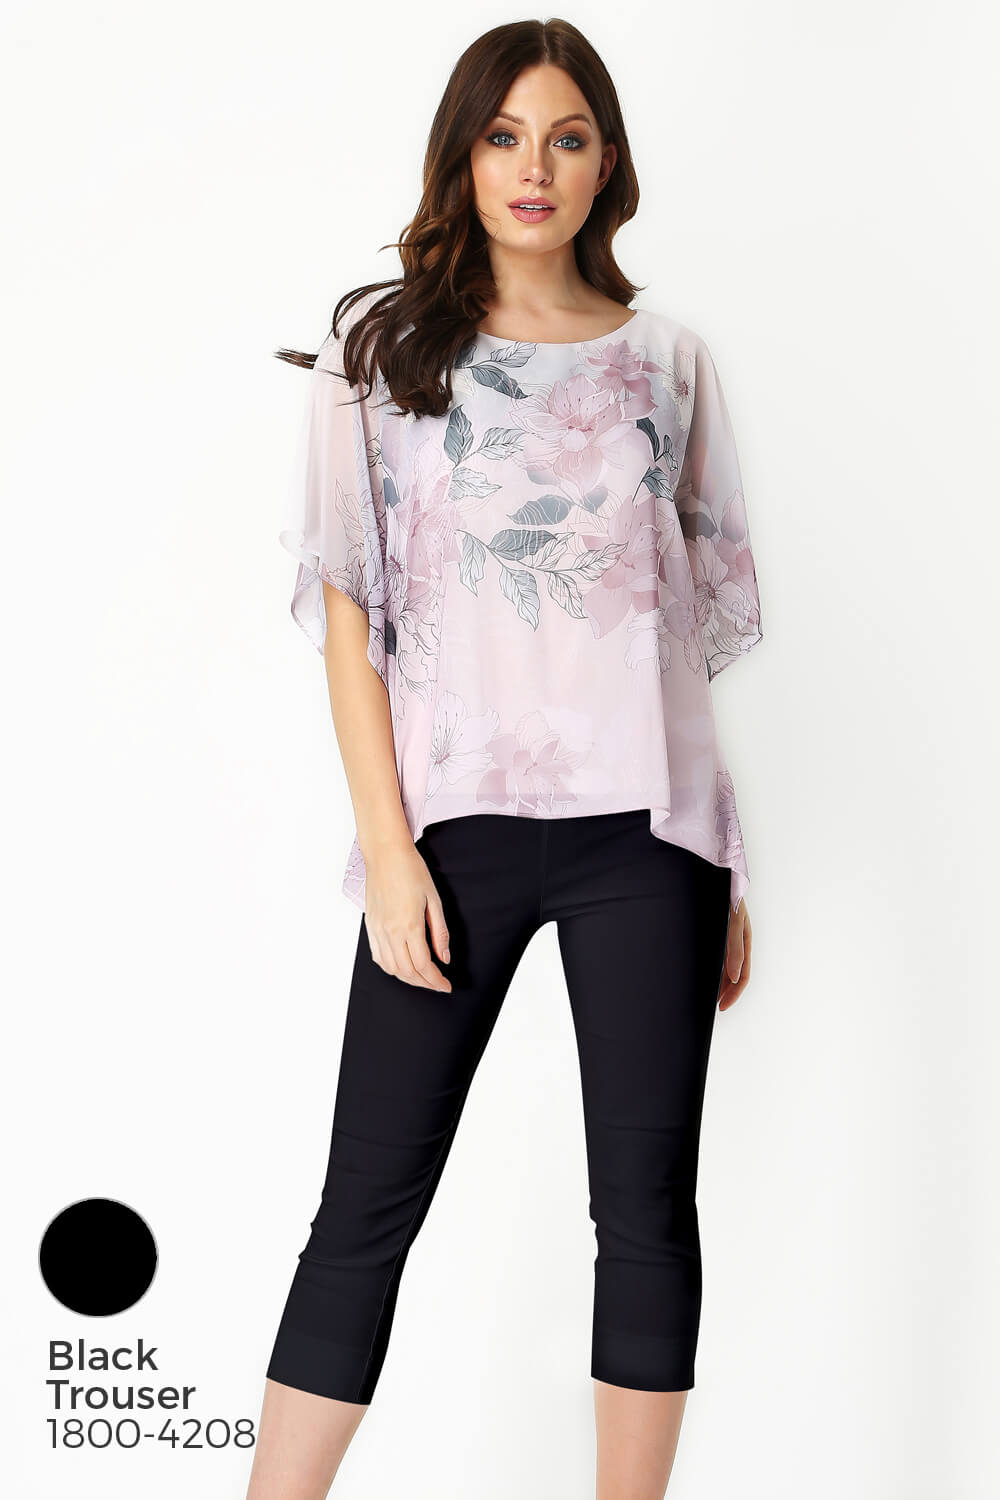 PINK Floral Chiffon Overlay Top, Image 8 of 8